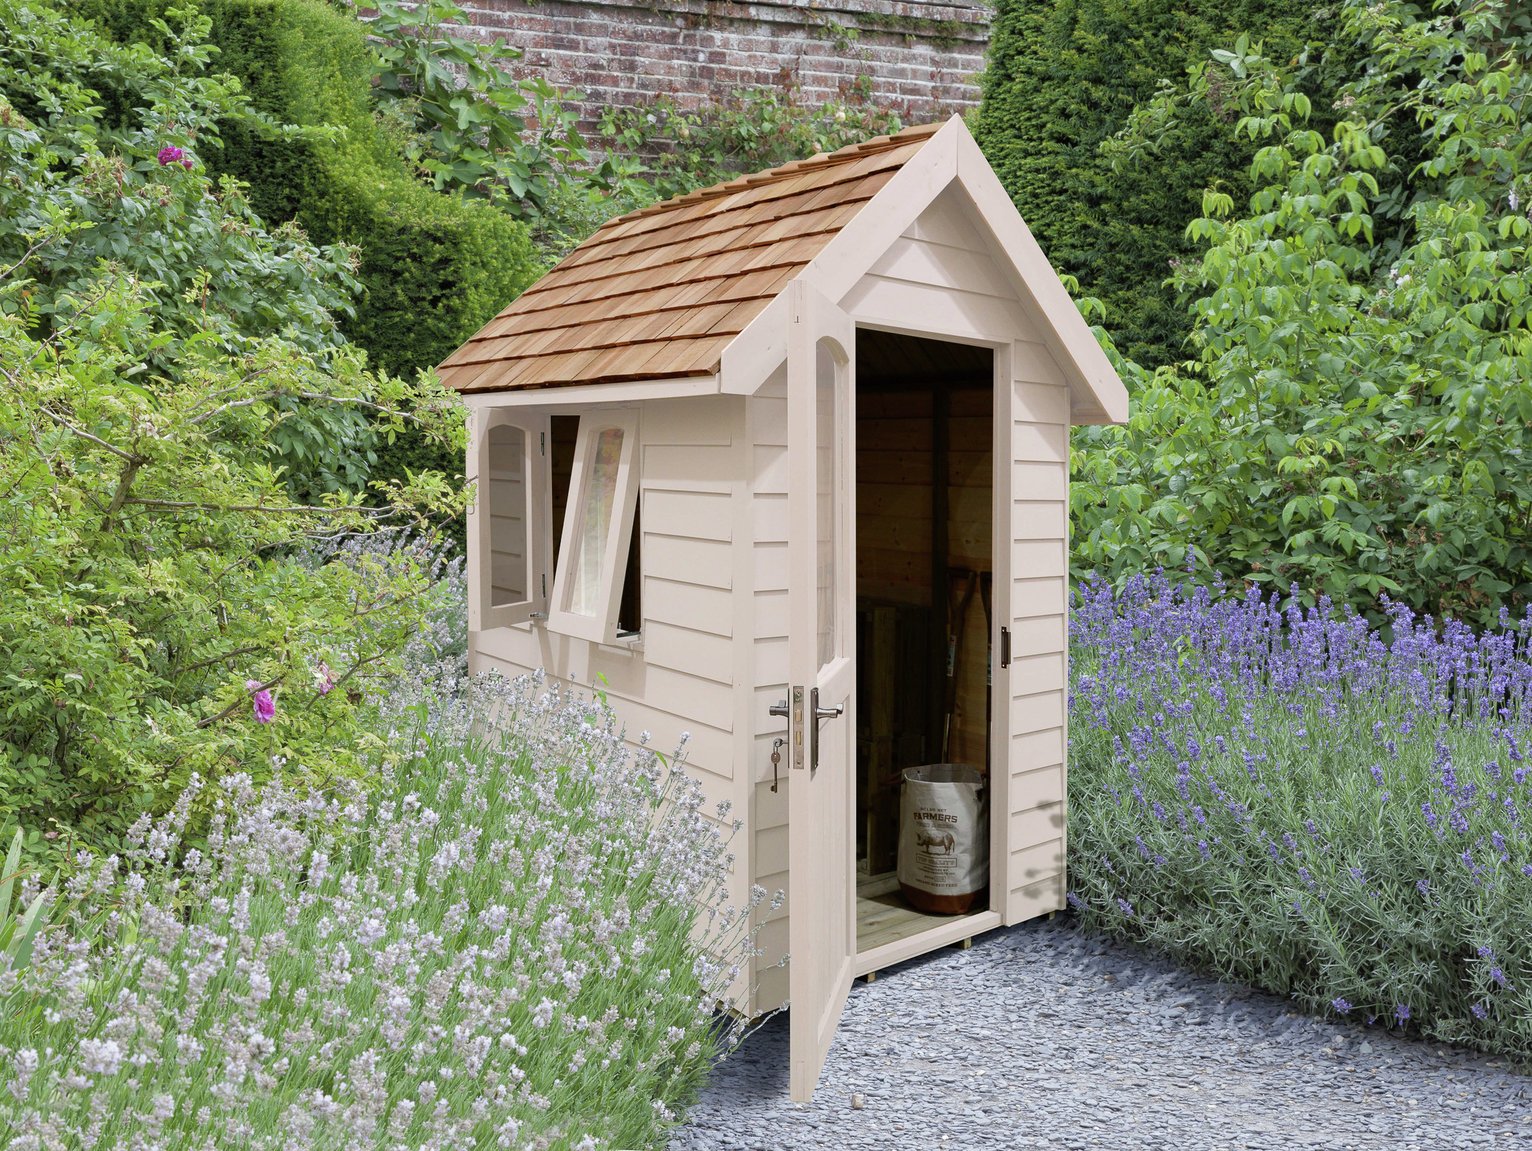 Forest Garden Overlap Retreat Shed - 6x4ft, Cream, Installed